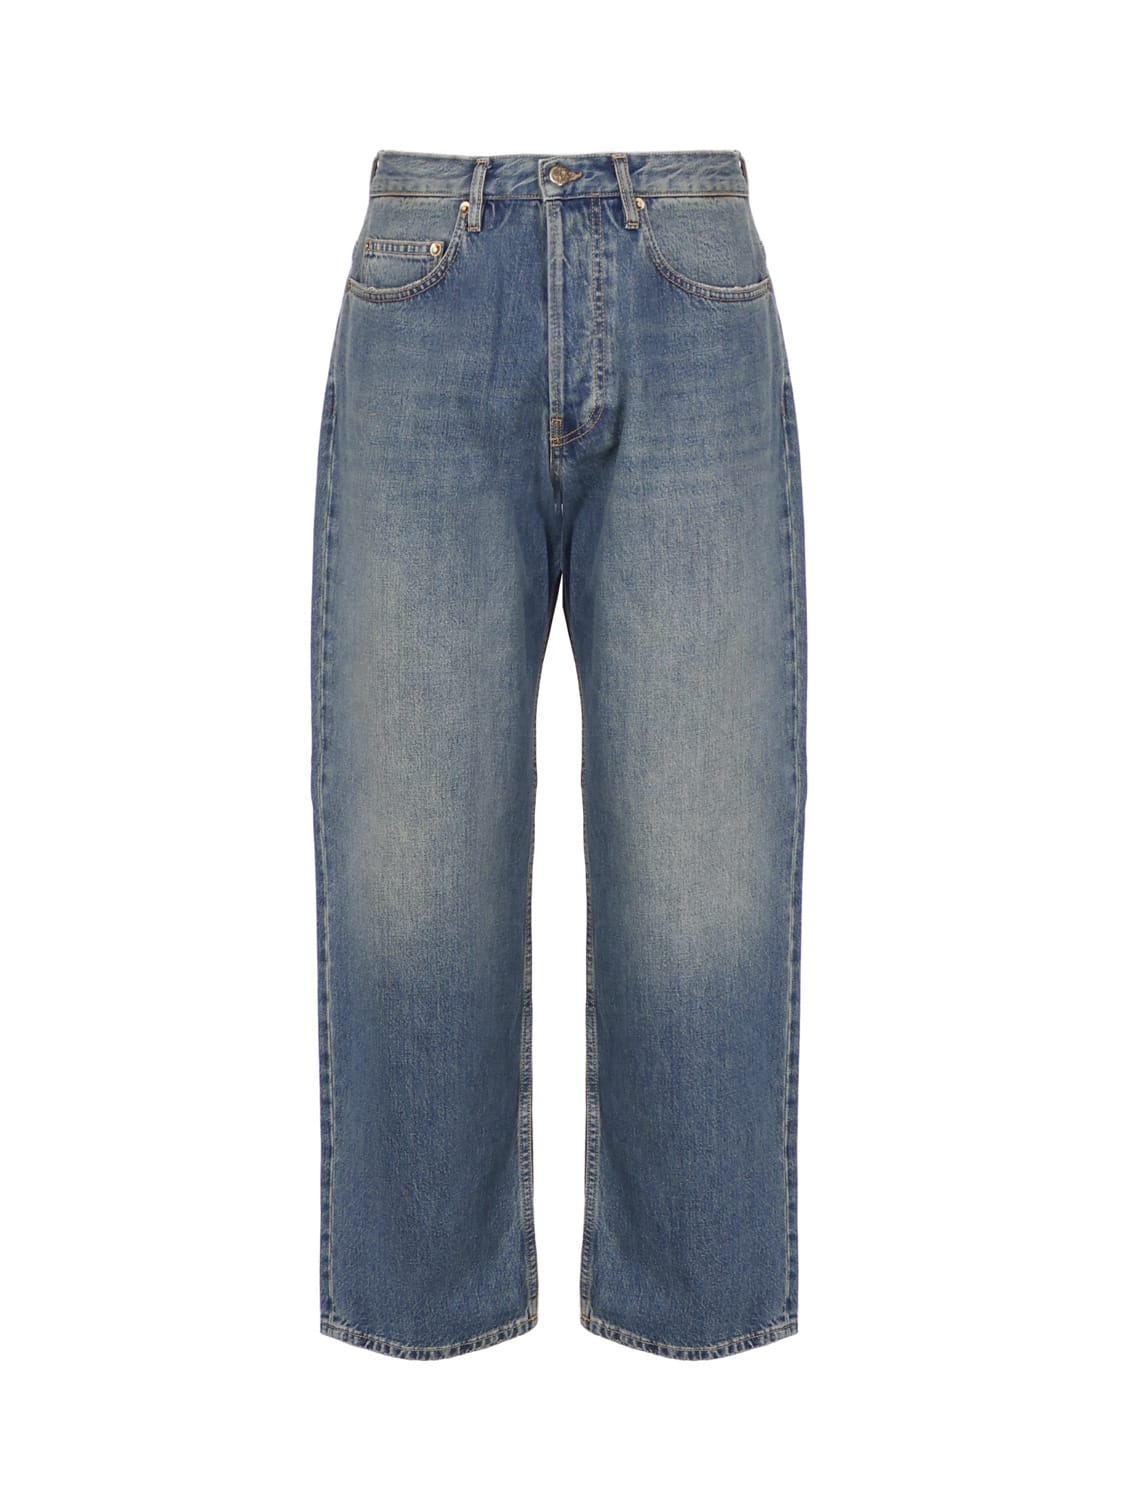 GOLDEN GOOSE BLUE JEANS WITH LIVED-IN TREATMENT